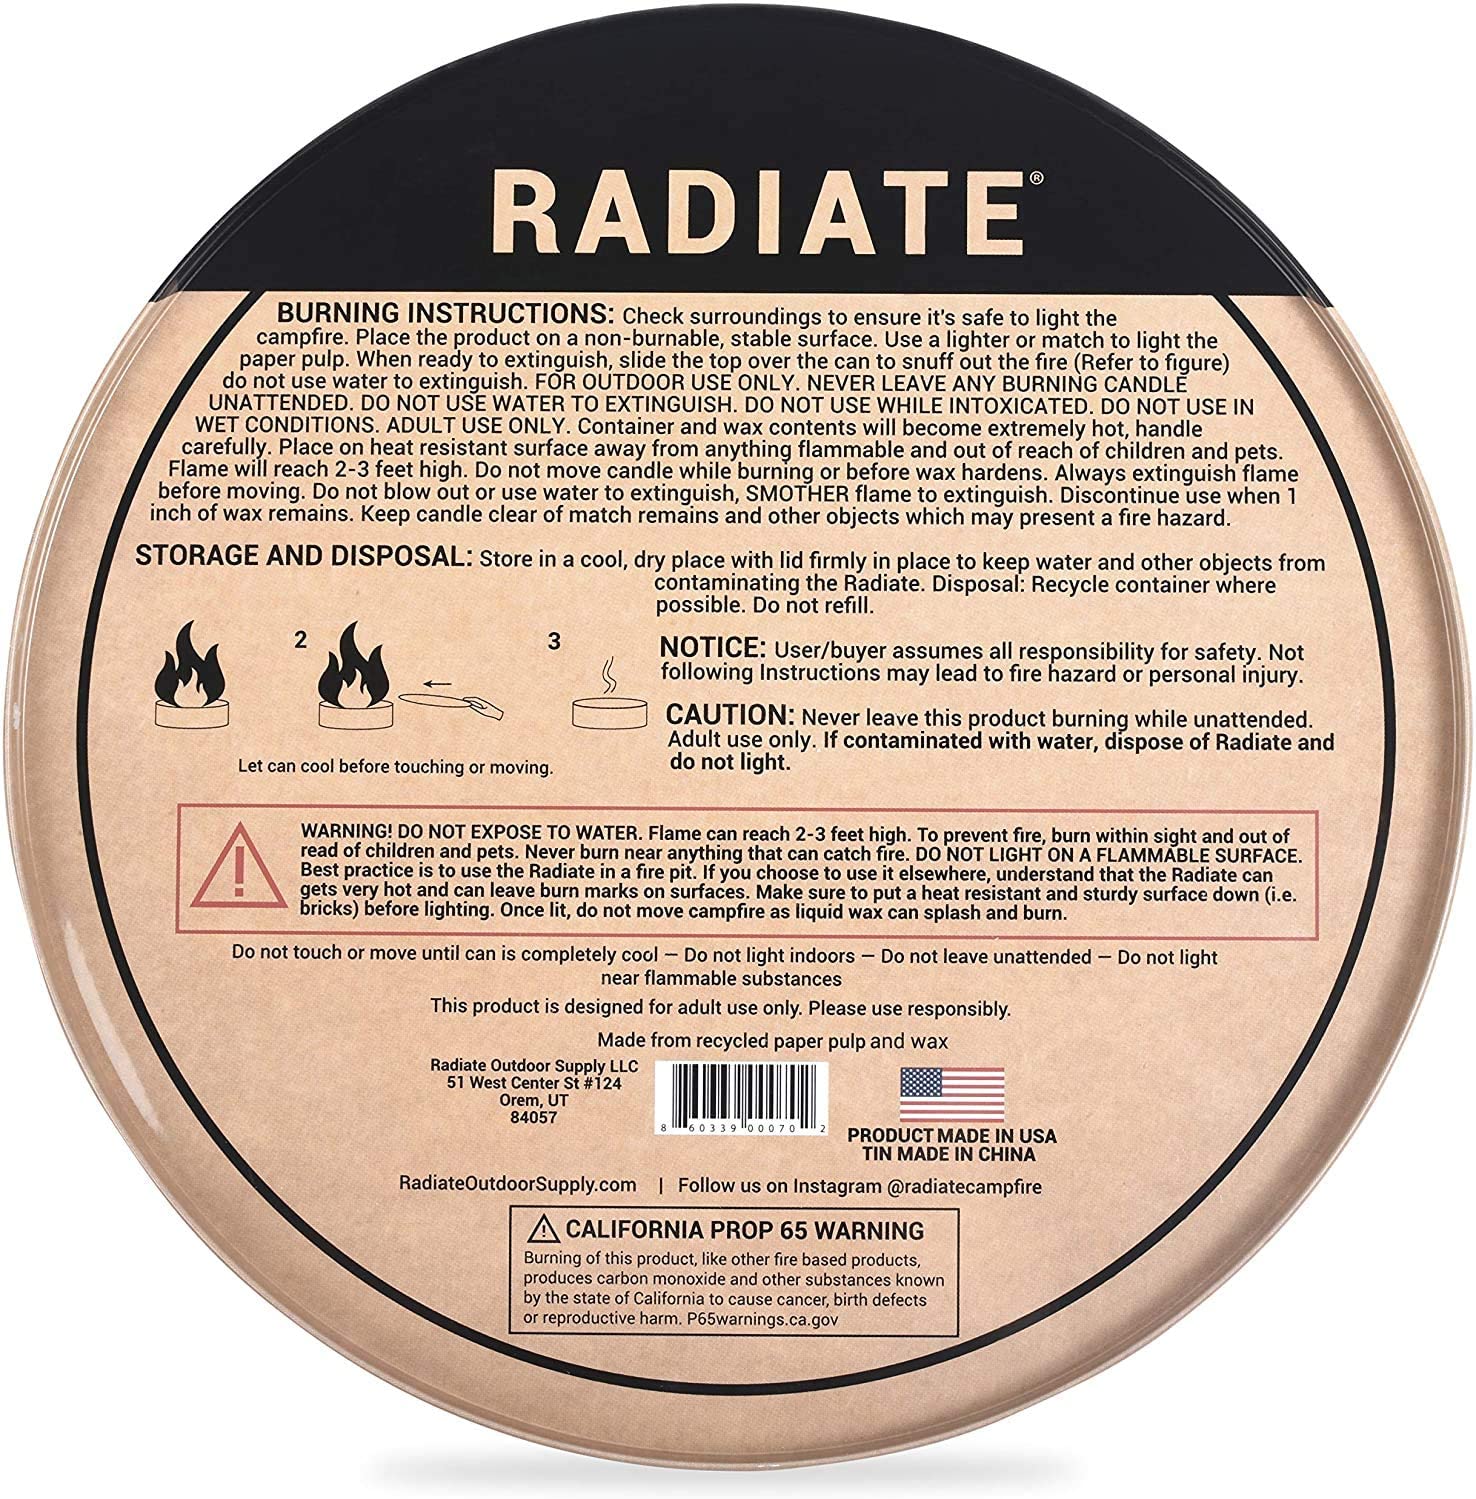 Radiate Portable Campfire: The Original Go-Anywhere Campfire | Lightweight and Portable | 3-5 Hours of Bright and Warm Burn Time | Convenient-No Embers-No Hassle | Made in USA | Original 1 Pack - image 4 of 7